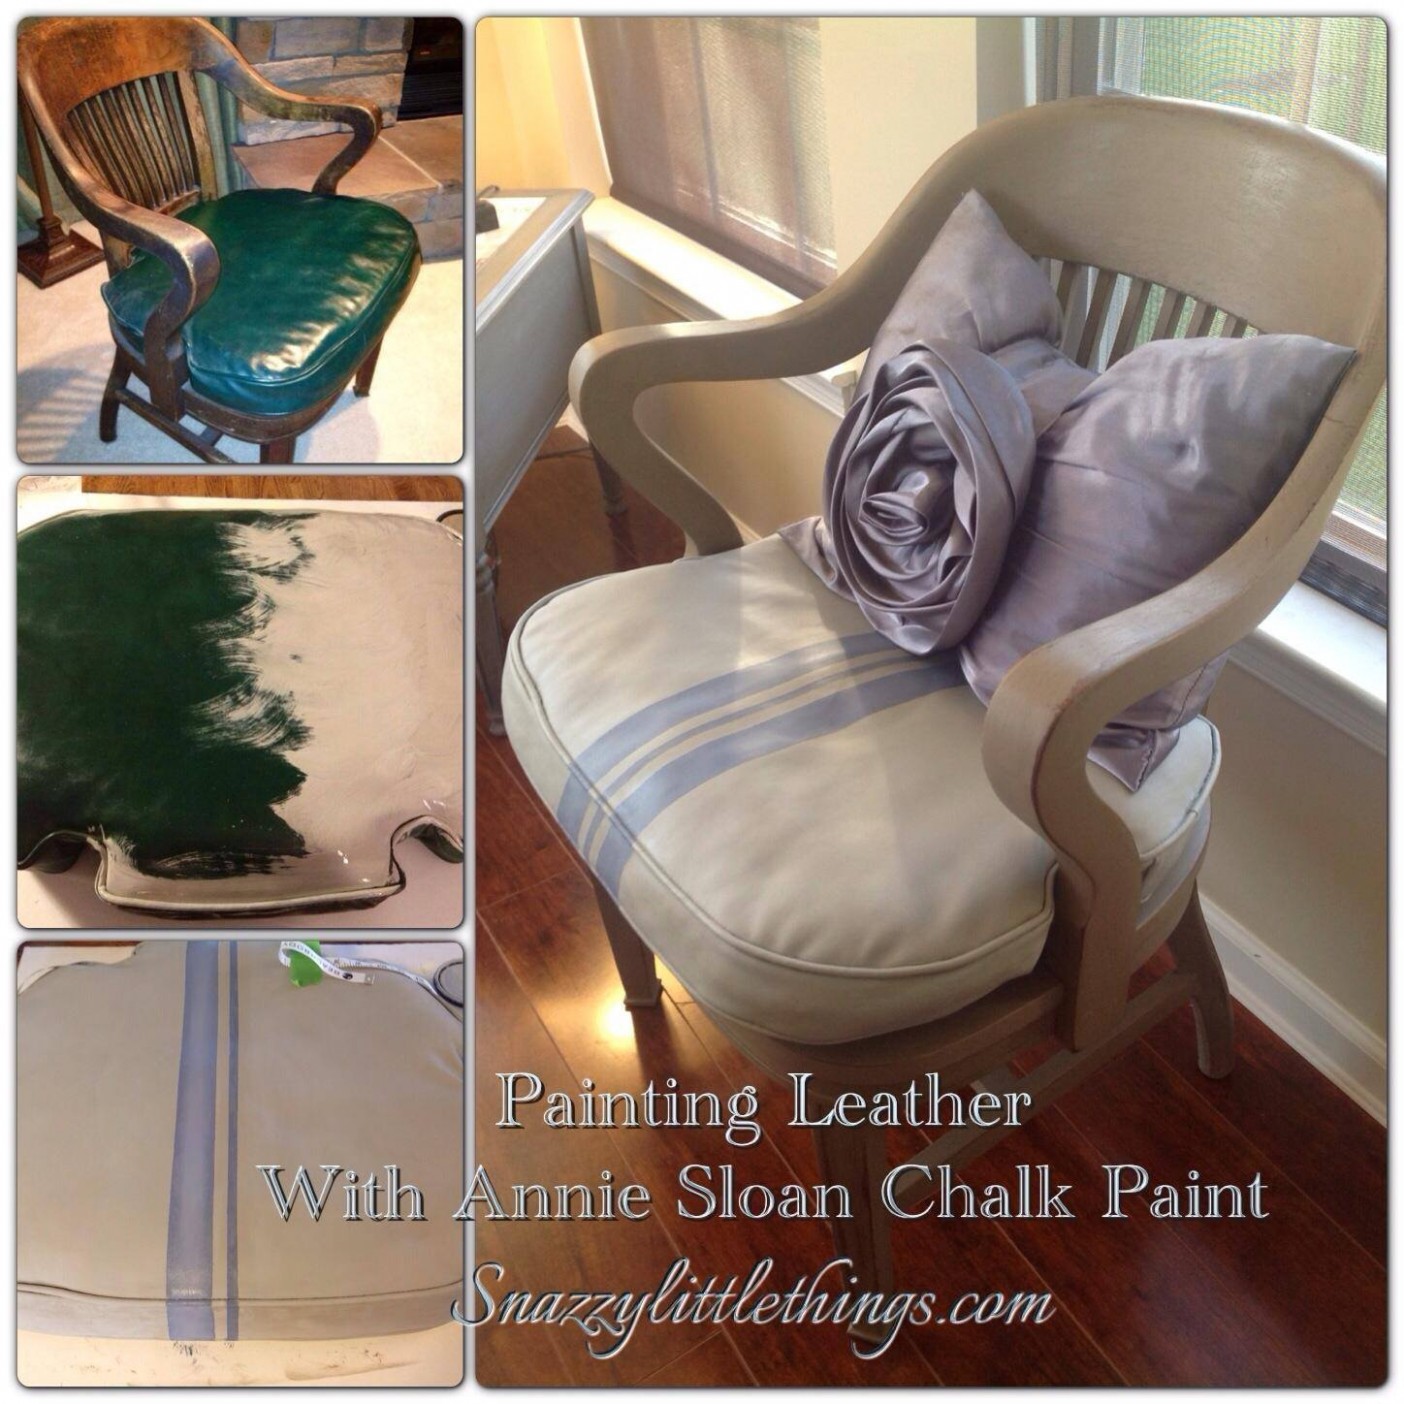 Diy Painting Leather Annie Sloan Chalk Paint Fabric